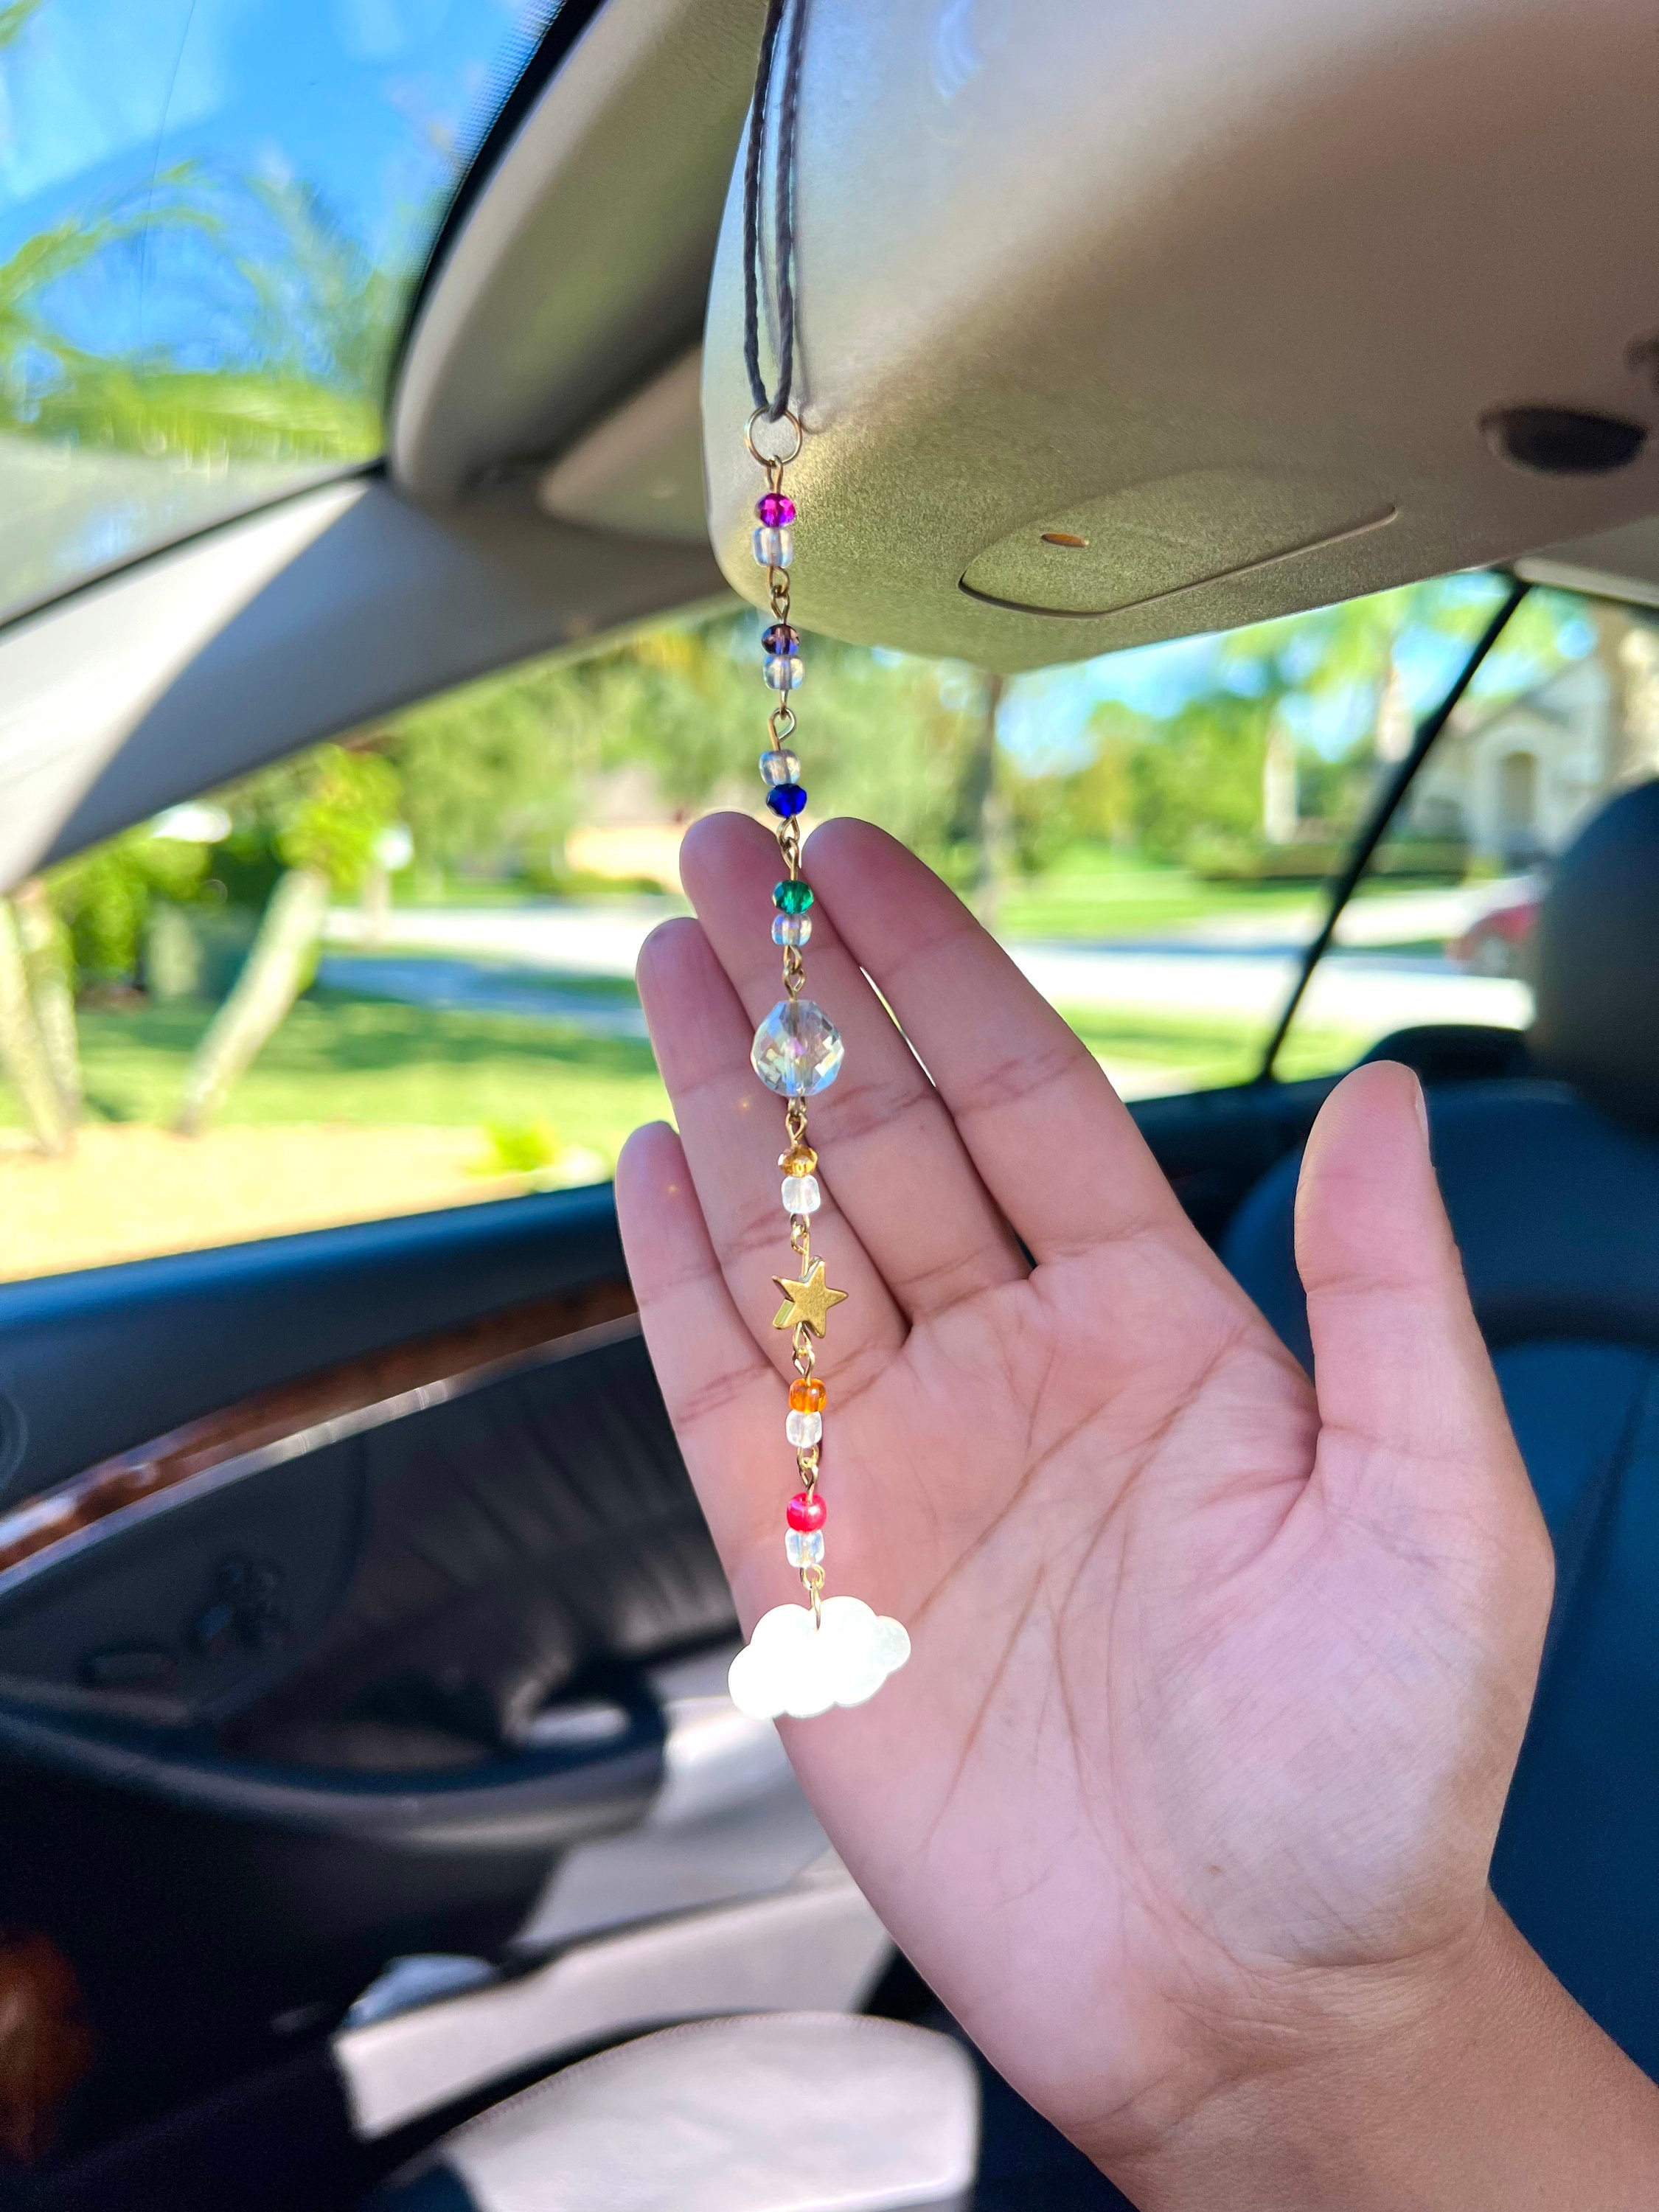 Beautiful Clear Sun Catcher Car Charm Elegant Light Refracting Rear View  Mirror Accessory Neutral and Gold Glass Beads, Car Decor, Gifts 